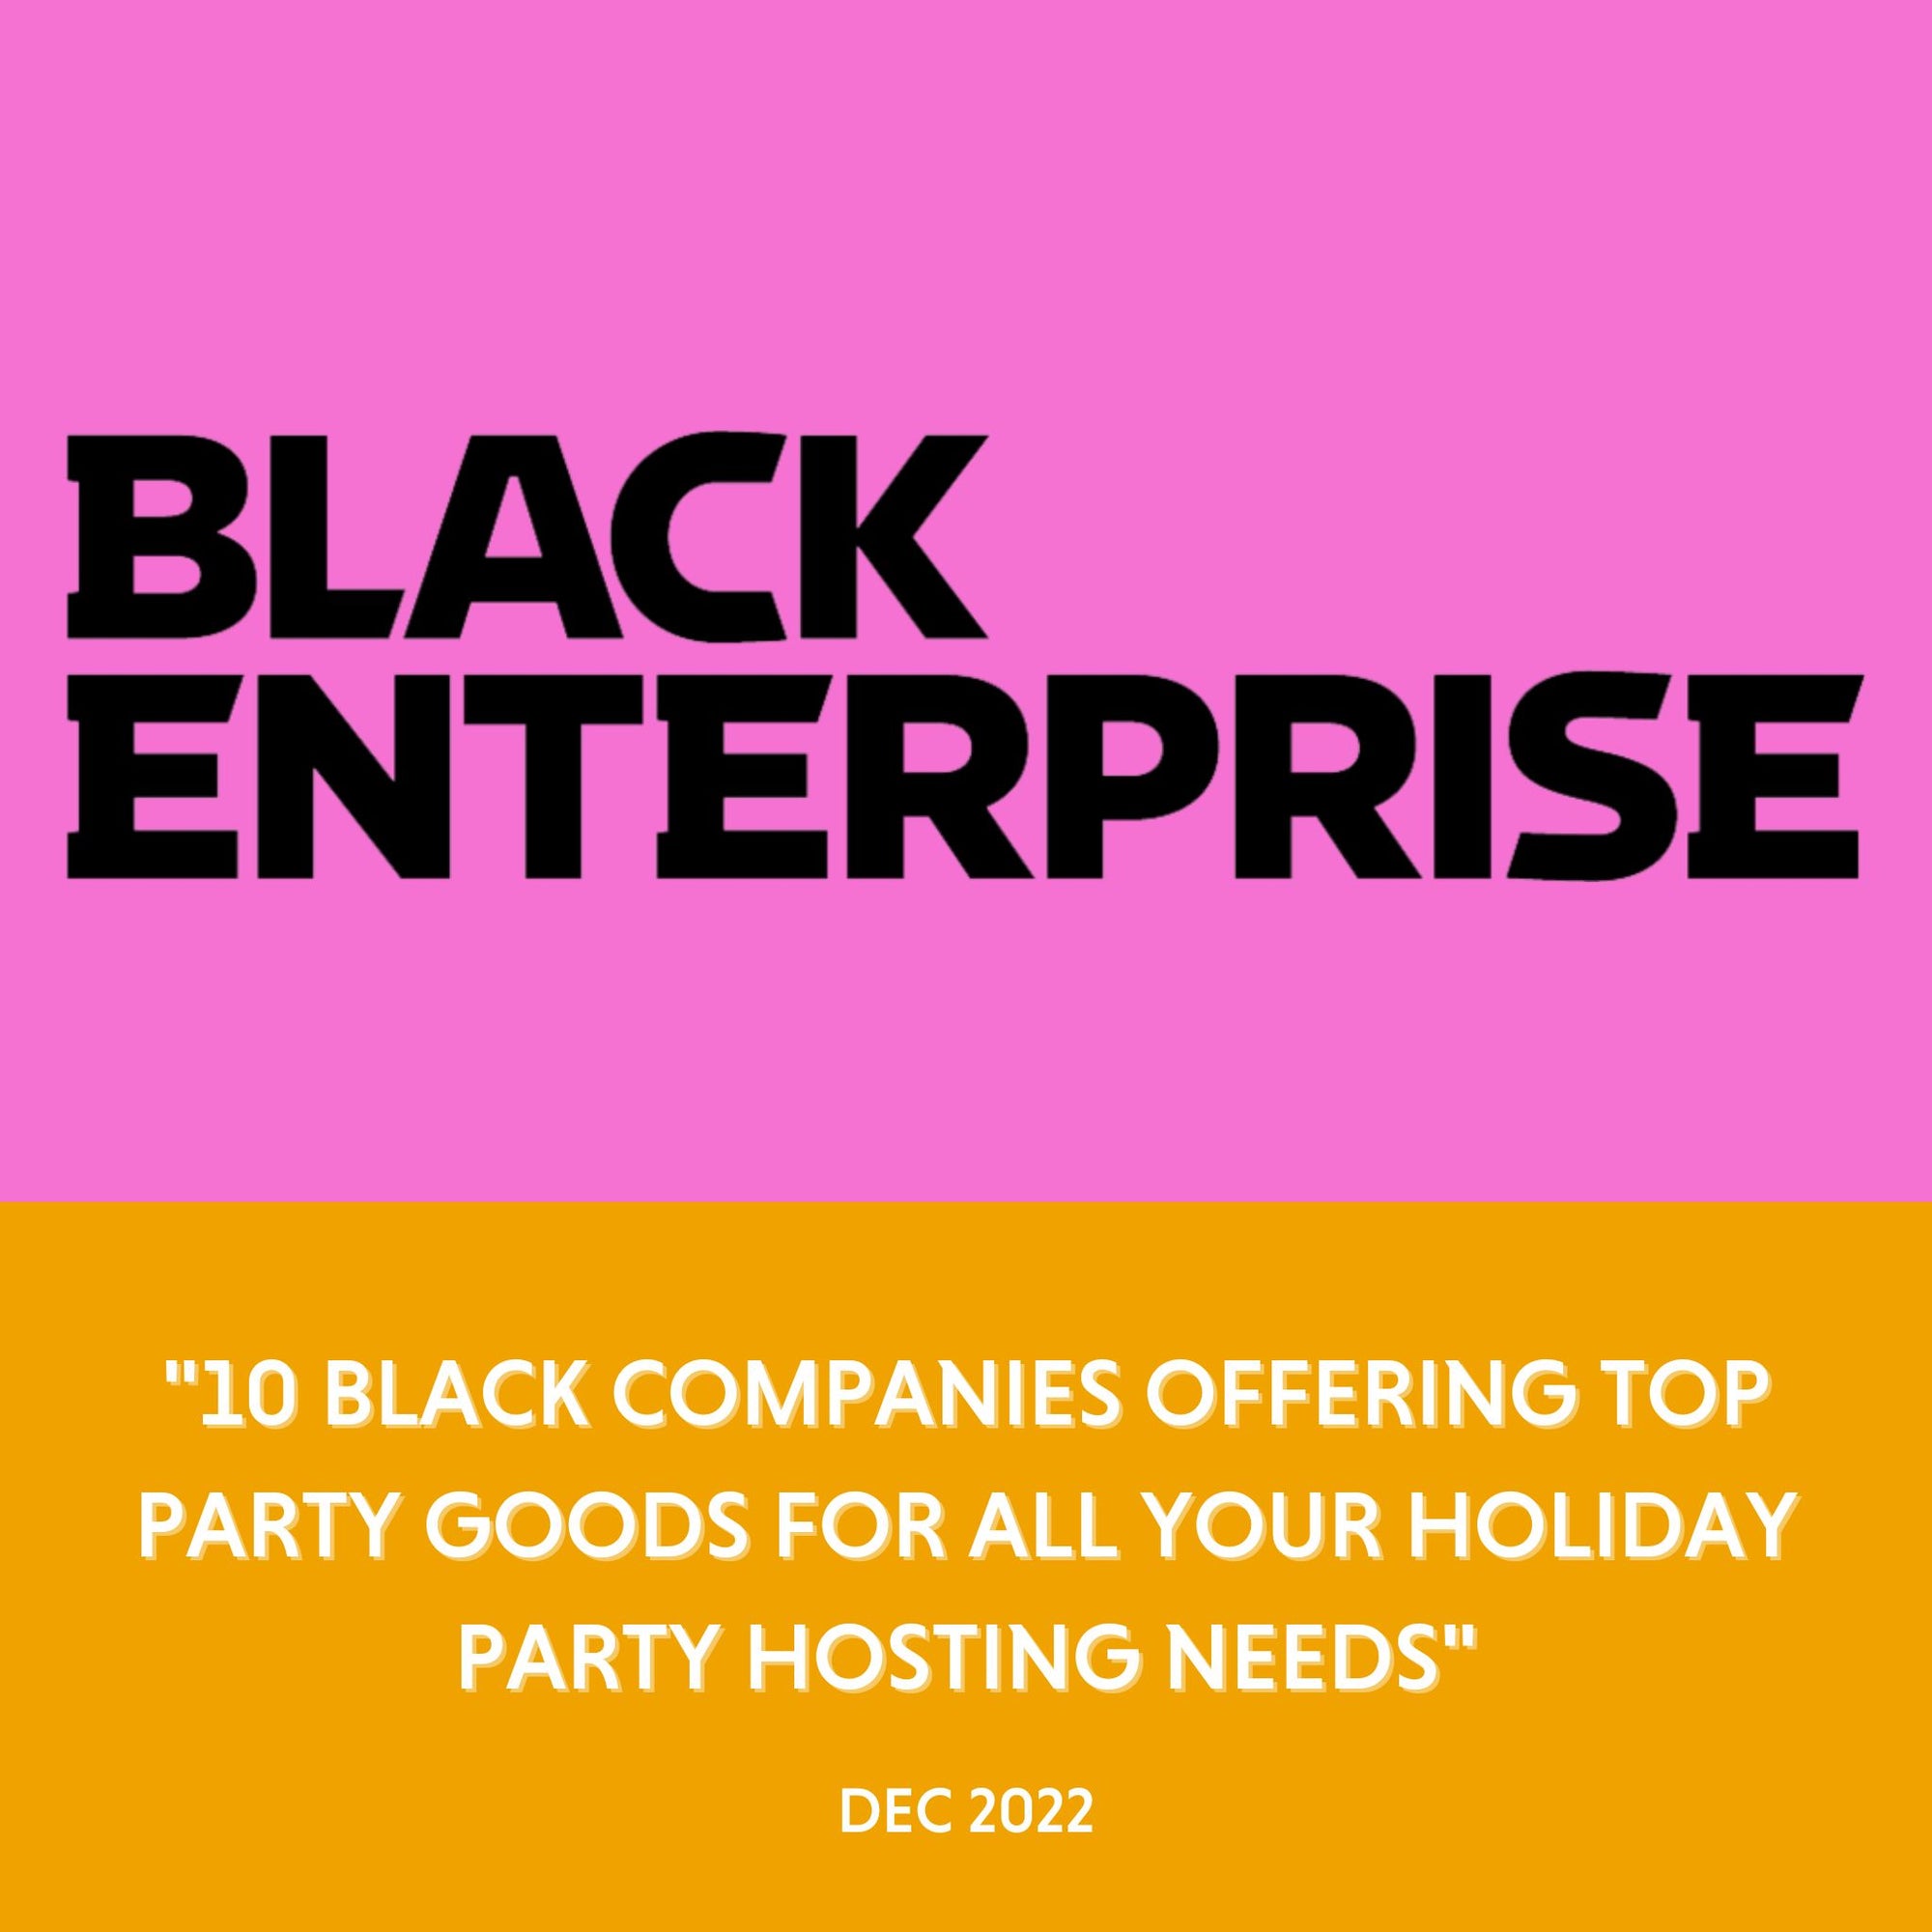 Black Enterprise - "10 BLACK COMPANIES OFFERING TOP PARTY GOODS FOR ALL YOUR HOLIDAY PARTY HOSTING NEEDS" -Dec 2022